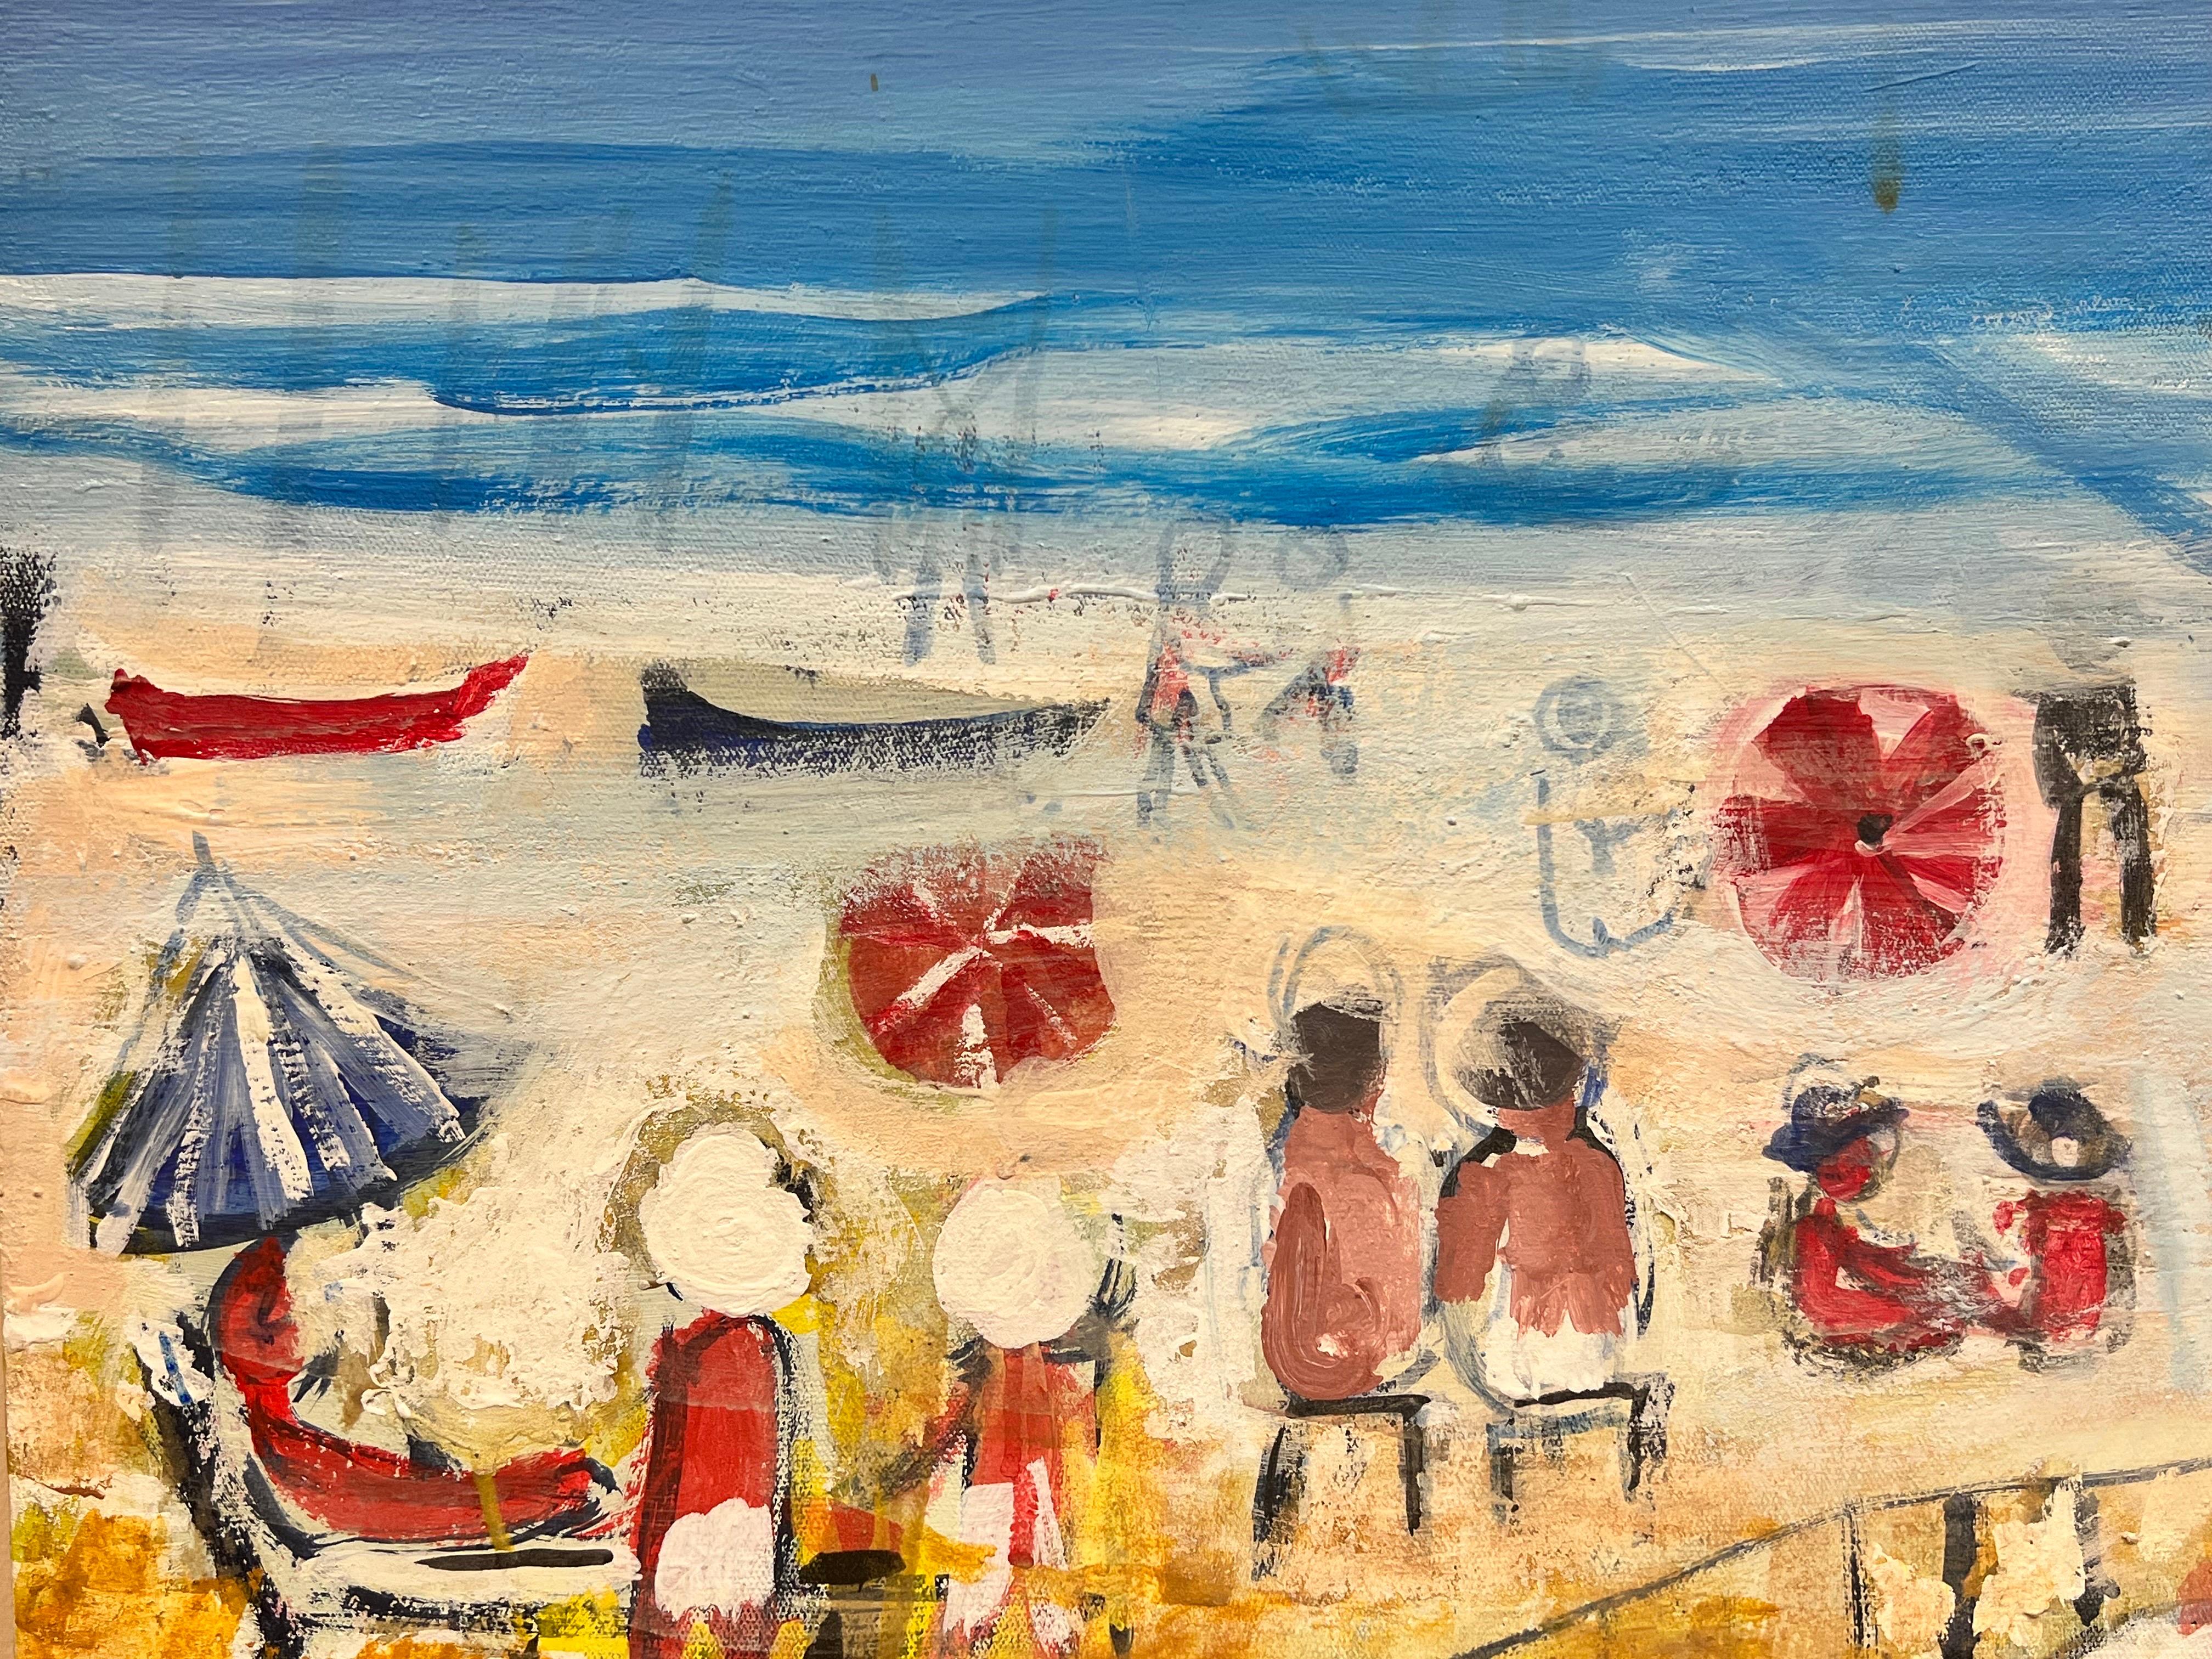 Summer on the Beach
Huguette Ginet-Lasnier (French 1927-2020)
signed
oil painting on canvas
20 x 24 inches.
All the paintings we have for sale by this artist have come from the artists estate in France.
The painting is in very good and presentable